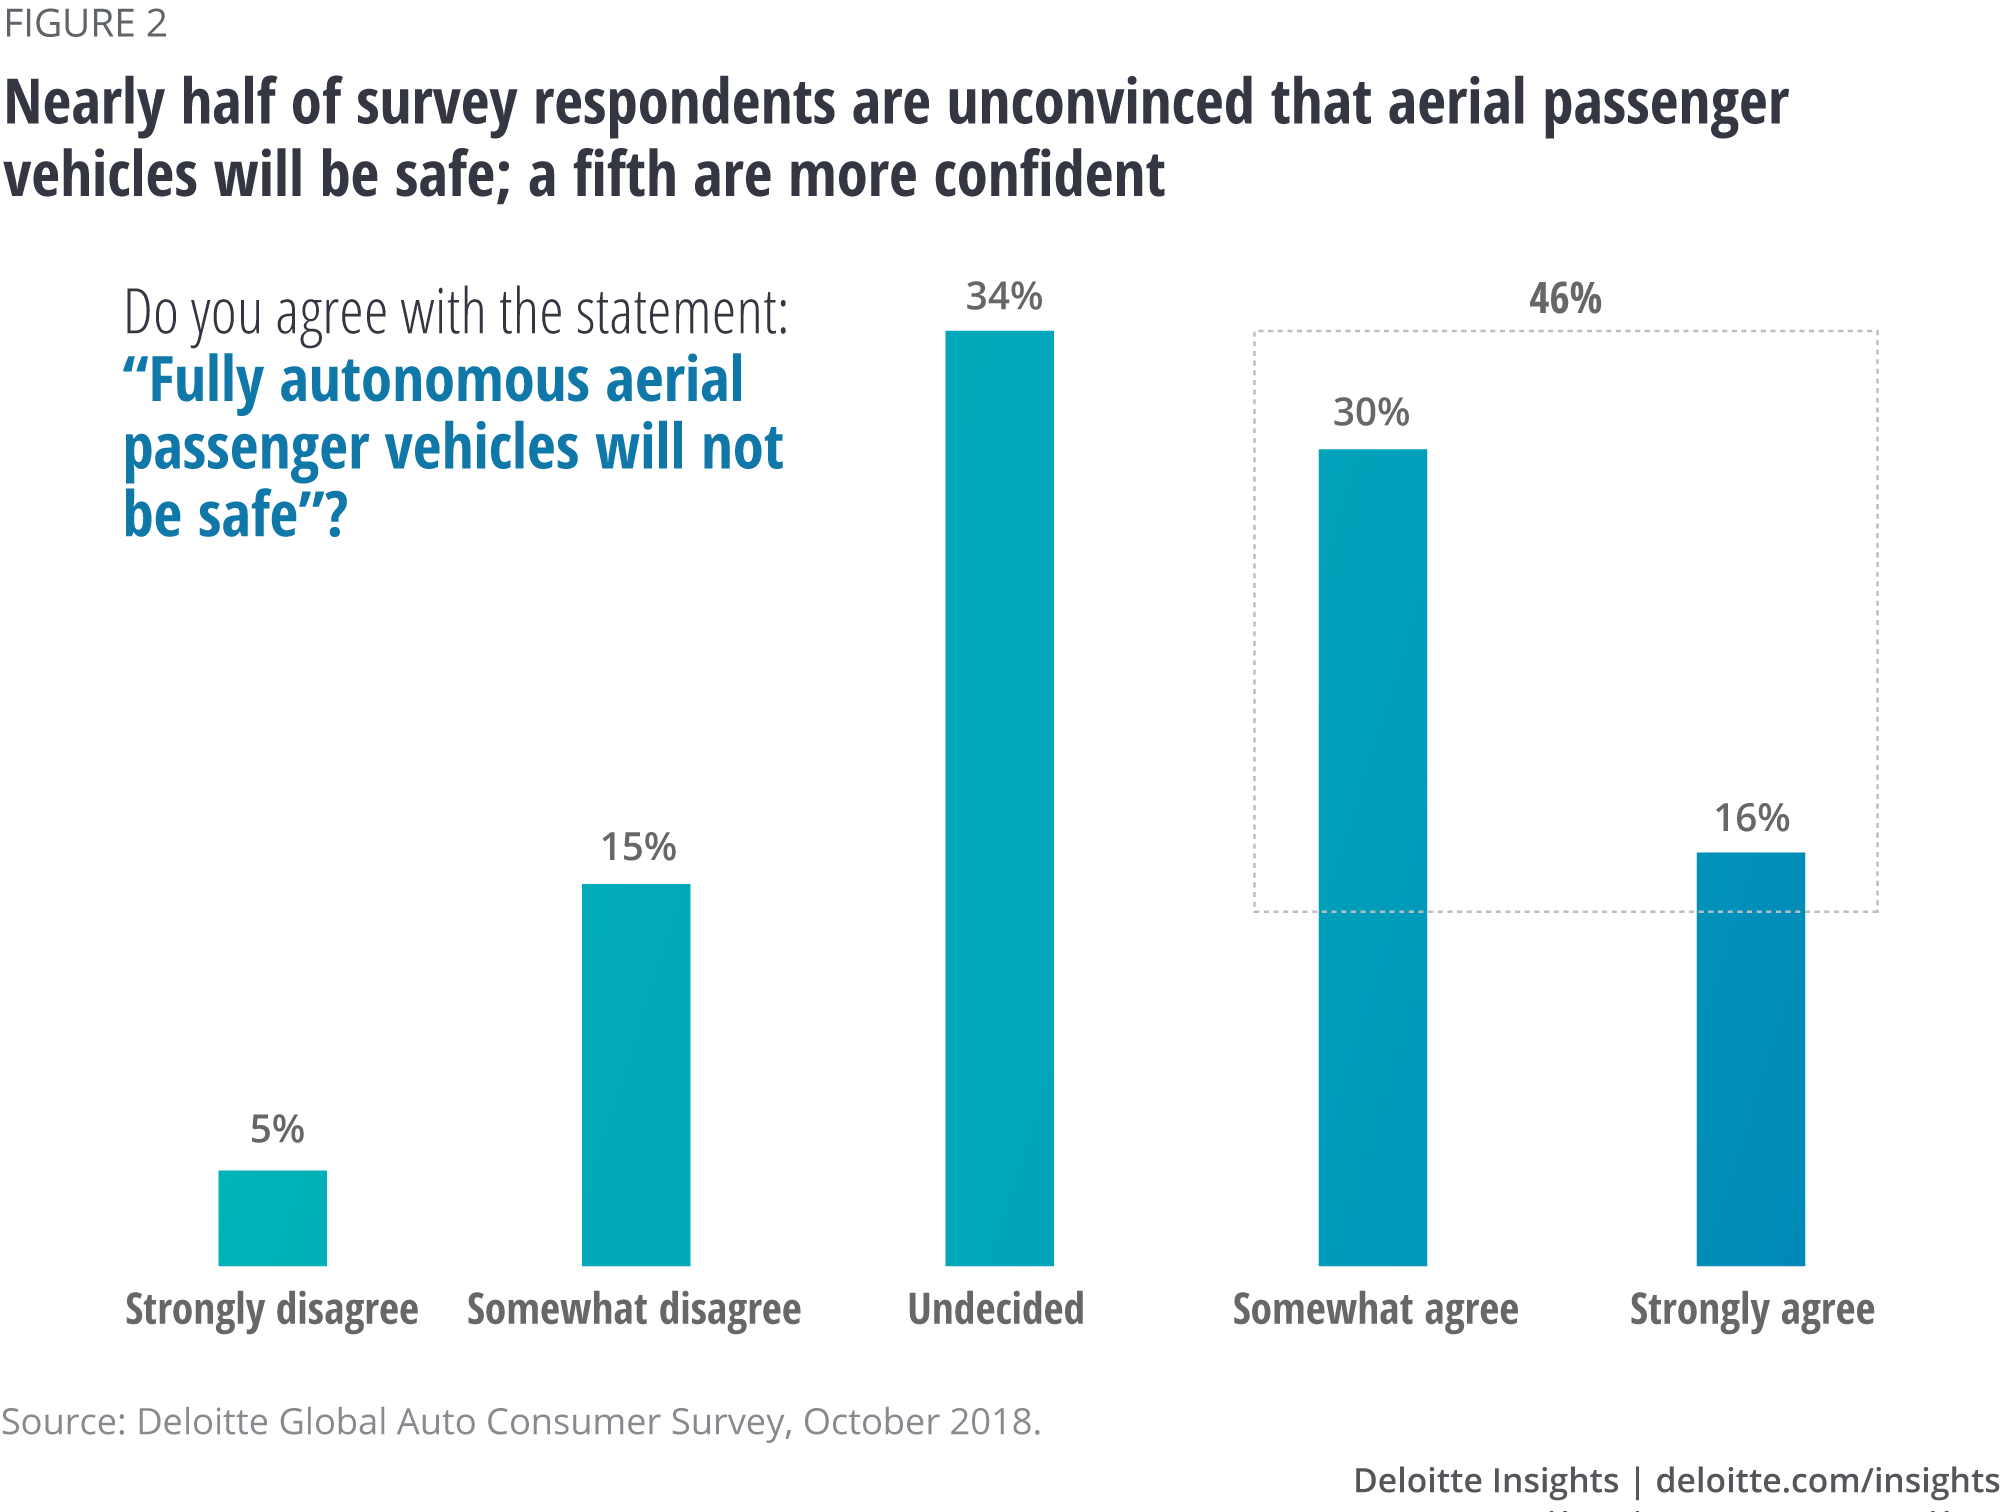 Nearly half of survey respondents are unconvinced that aerial passenger vehicles will be safe; a fifth are more confident